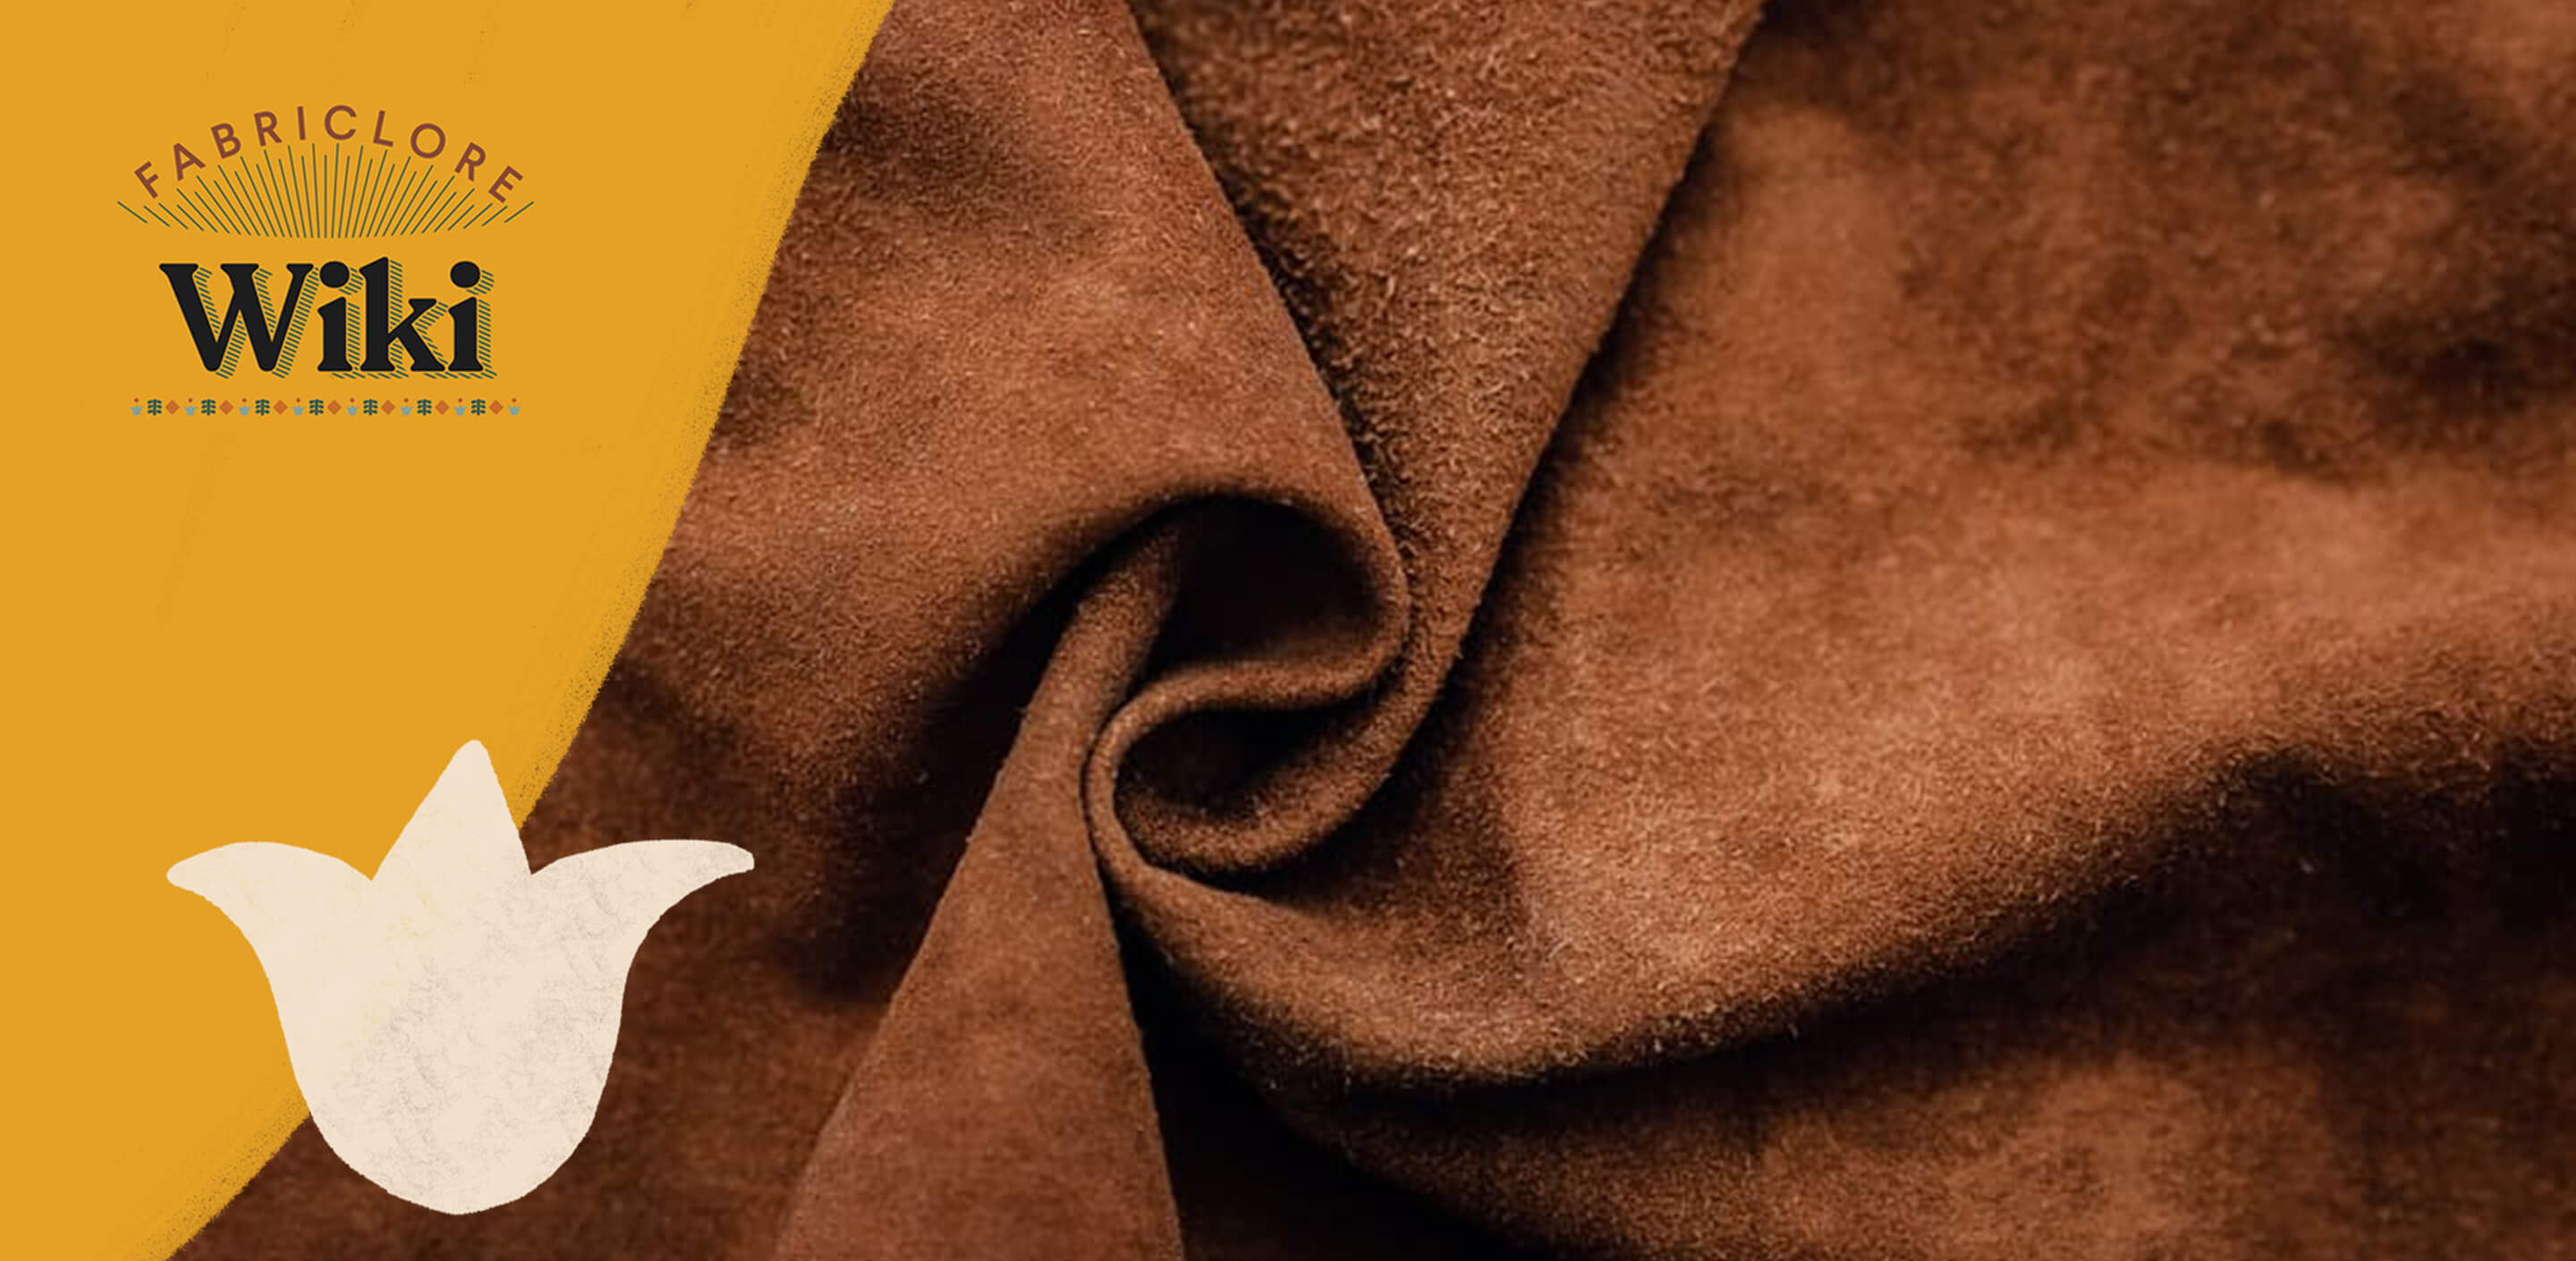 Suede Fabric: A Comprehensive Guide